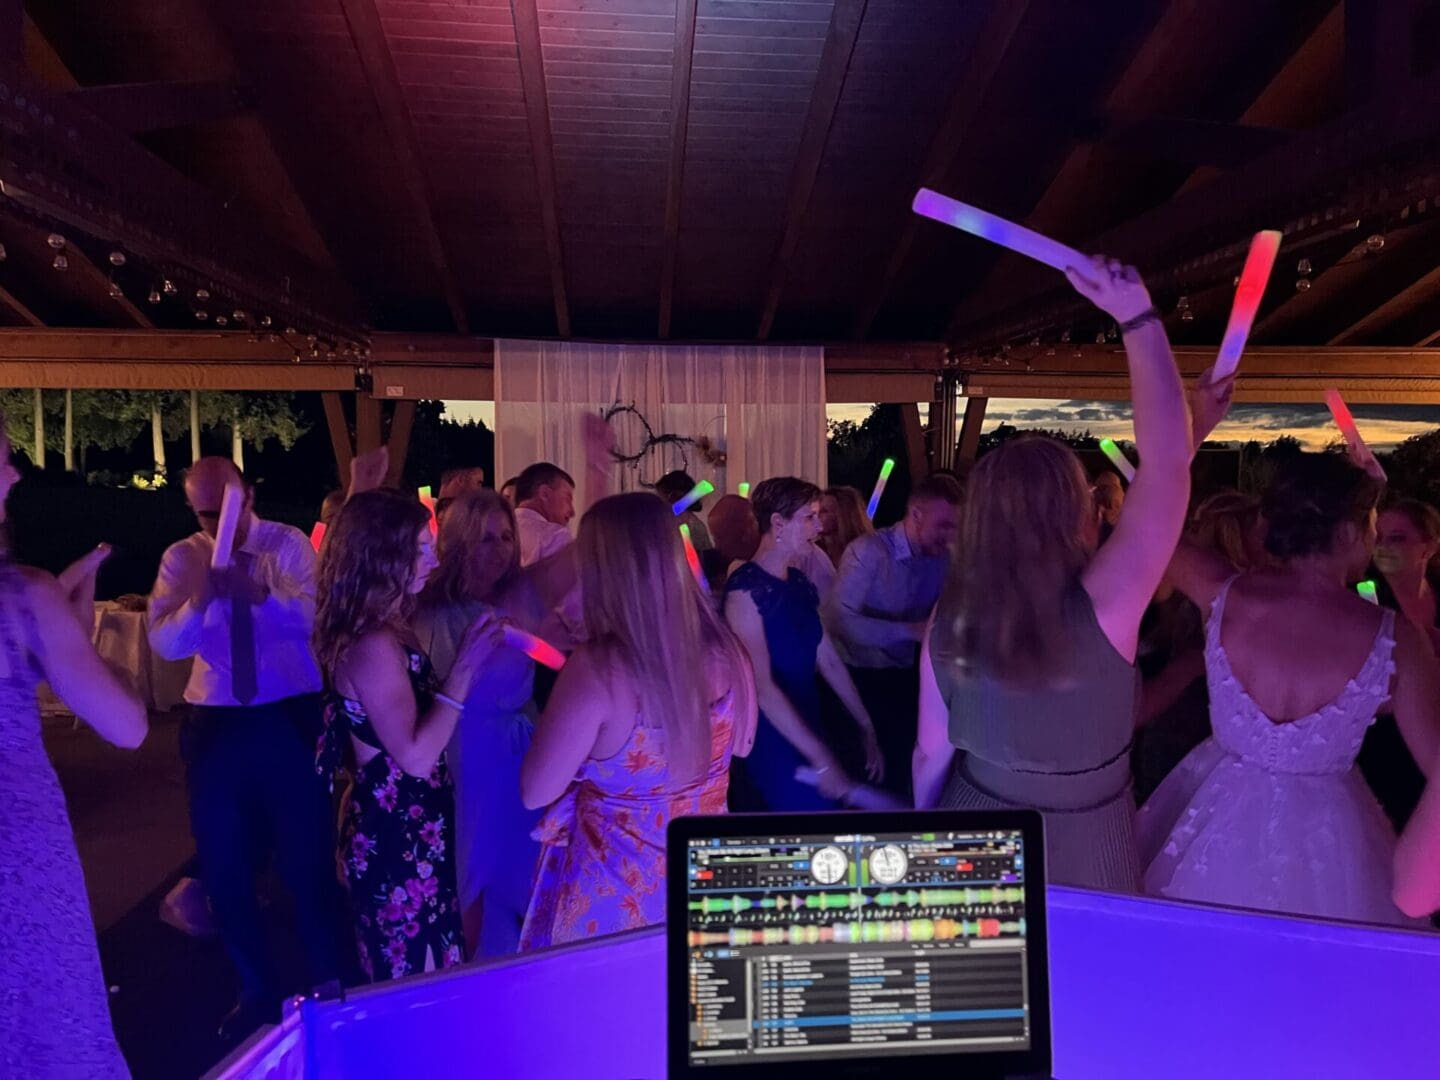 A group of people at a party with their hands in the air.